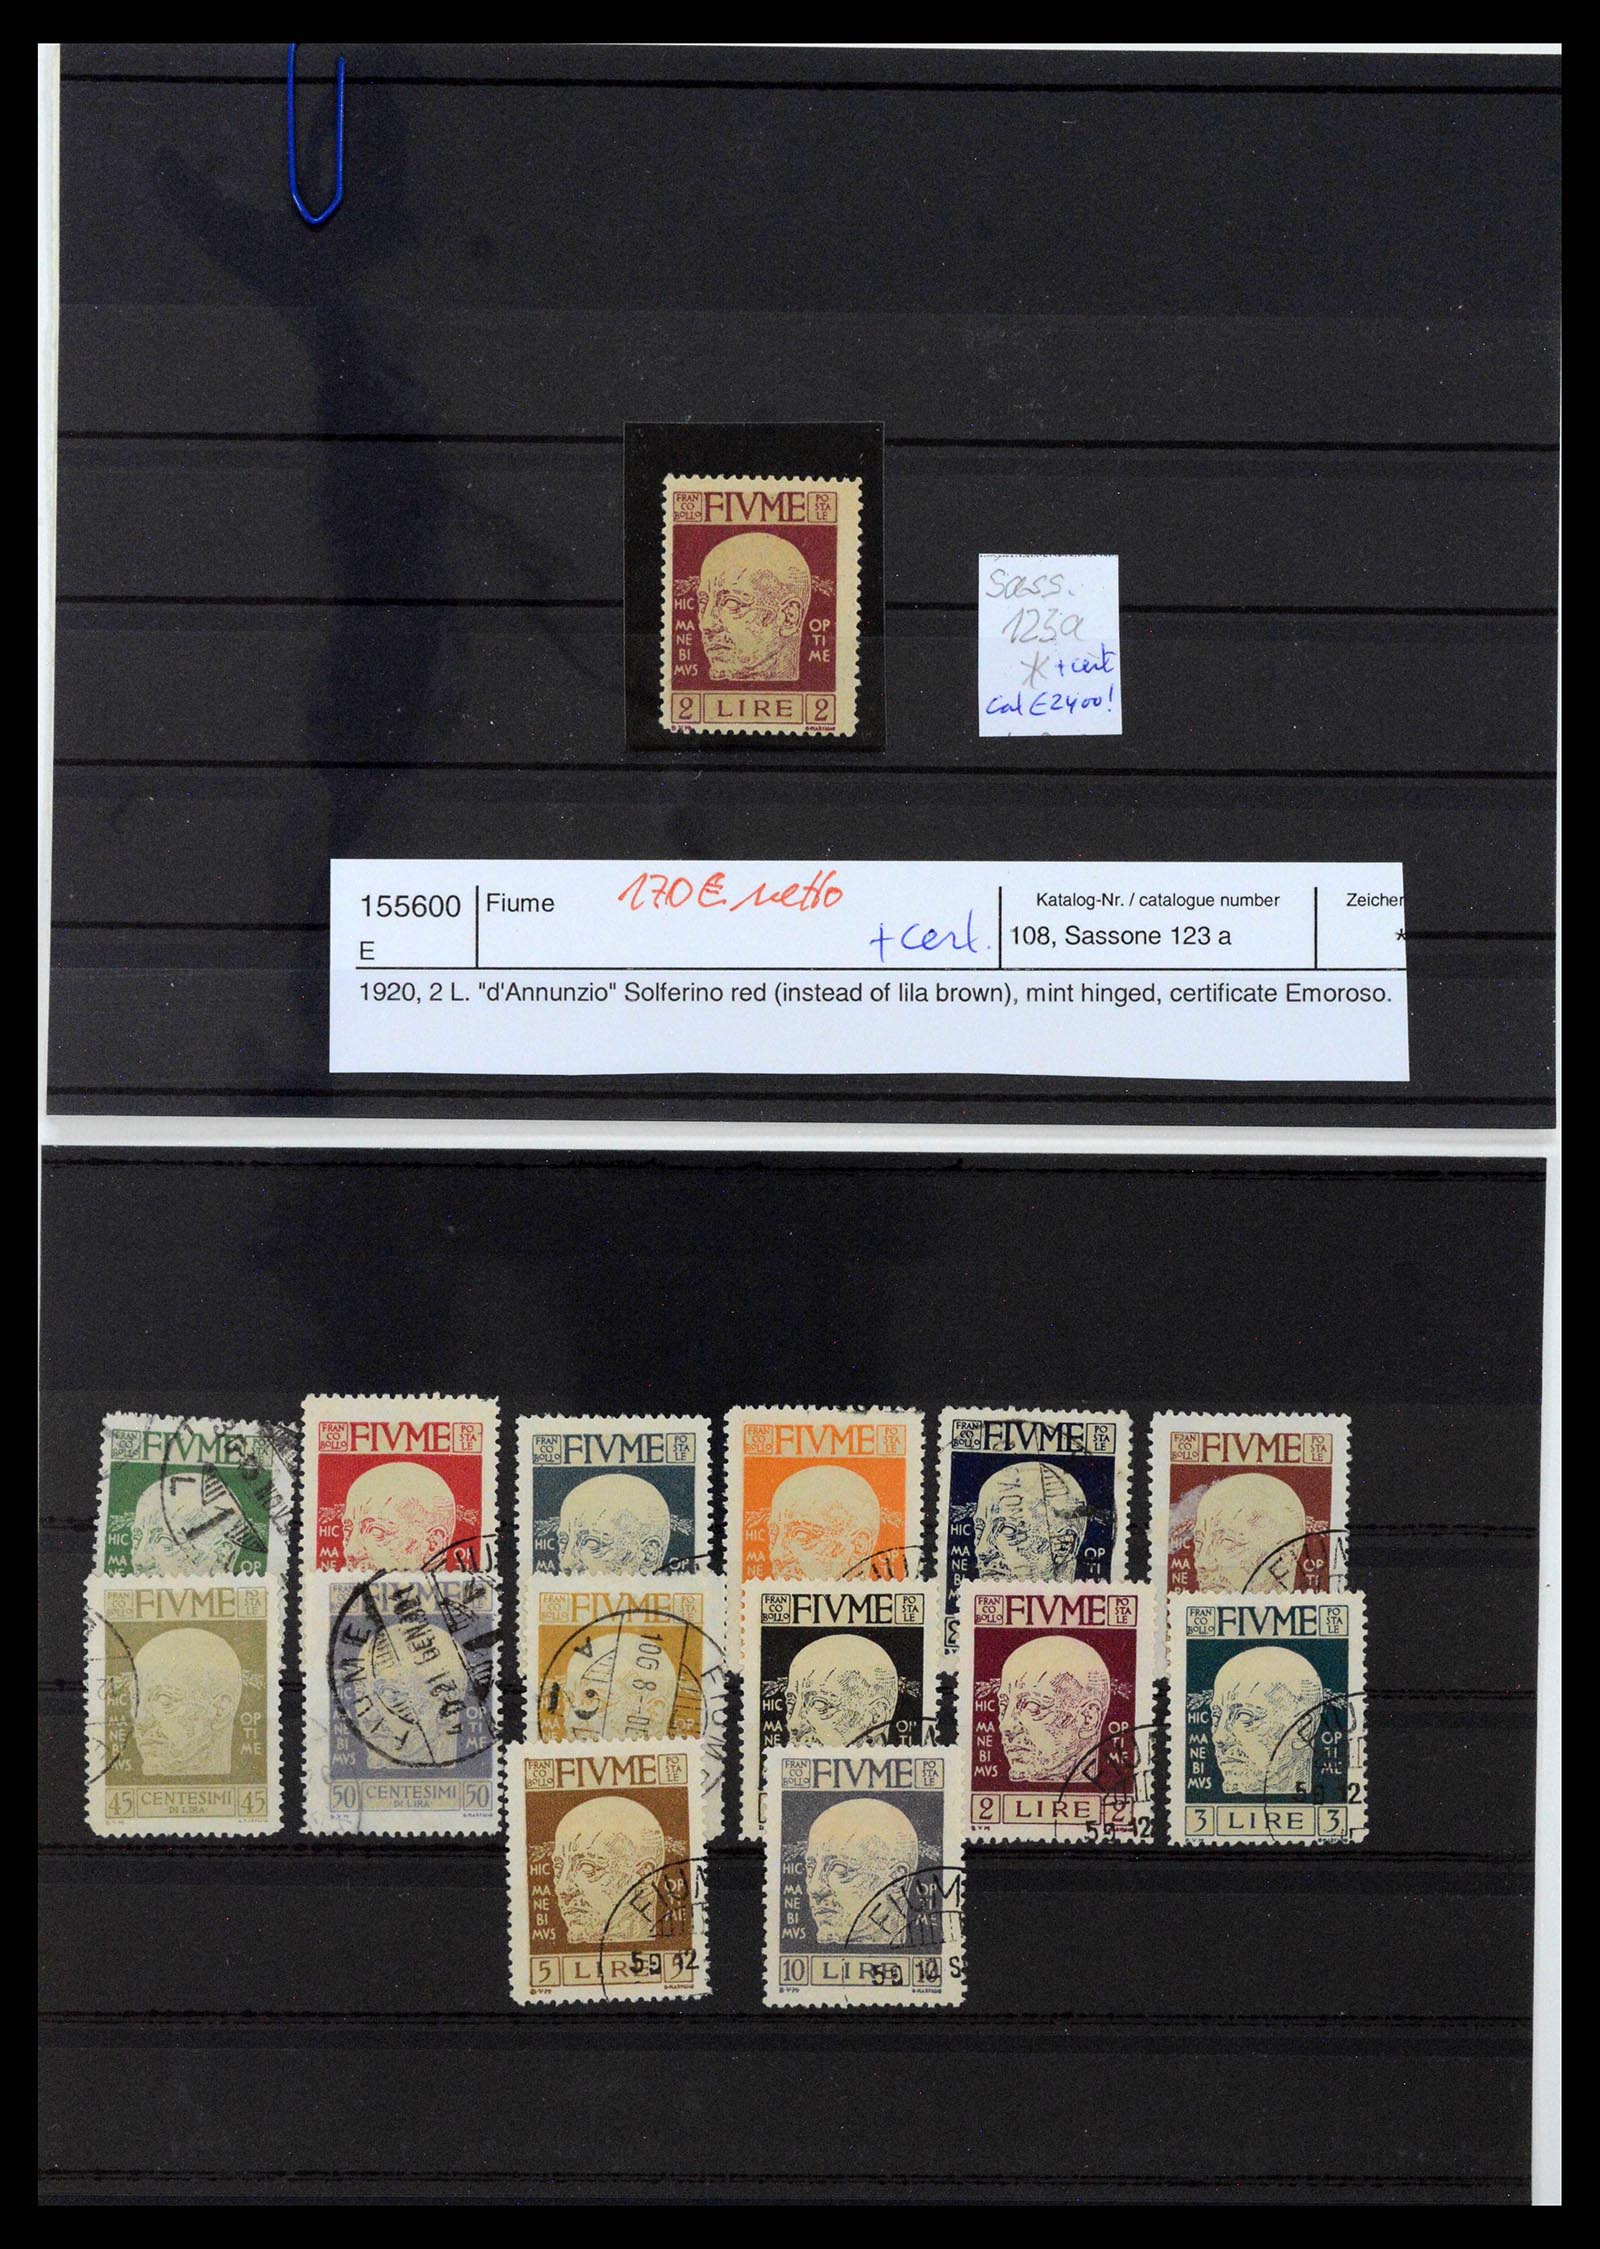 38507 0054 - Stamp collection 38507 Fiume 1920-1924.